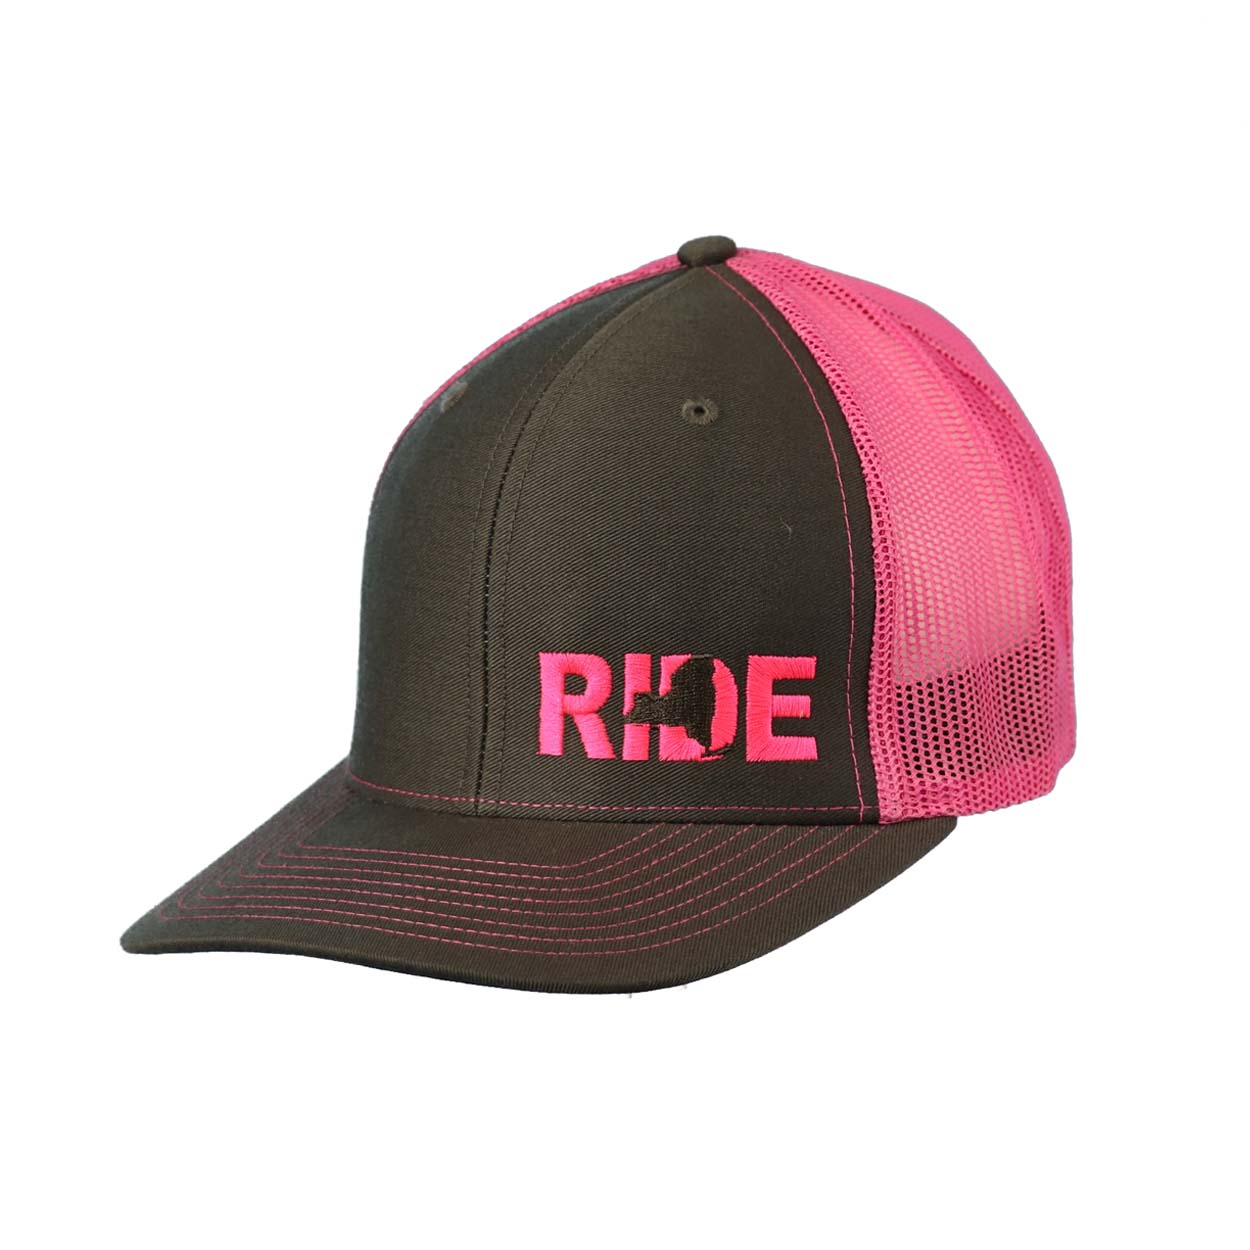 Ride New York Night Out Pro Embroidered Snapback Trucker Hat Gray/Pink